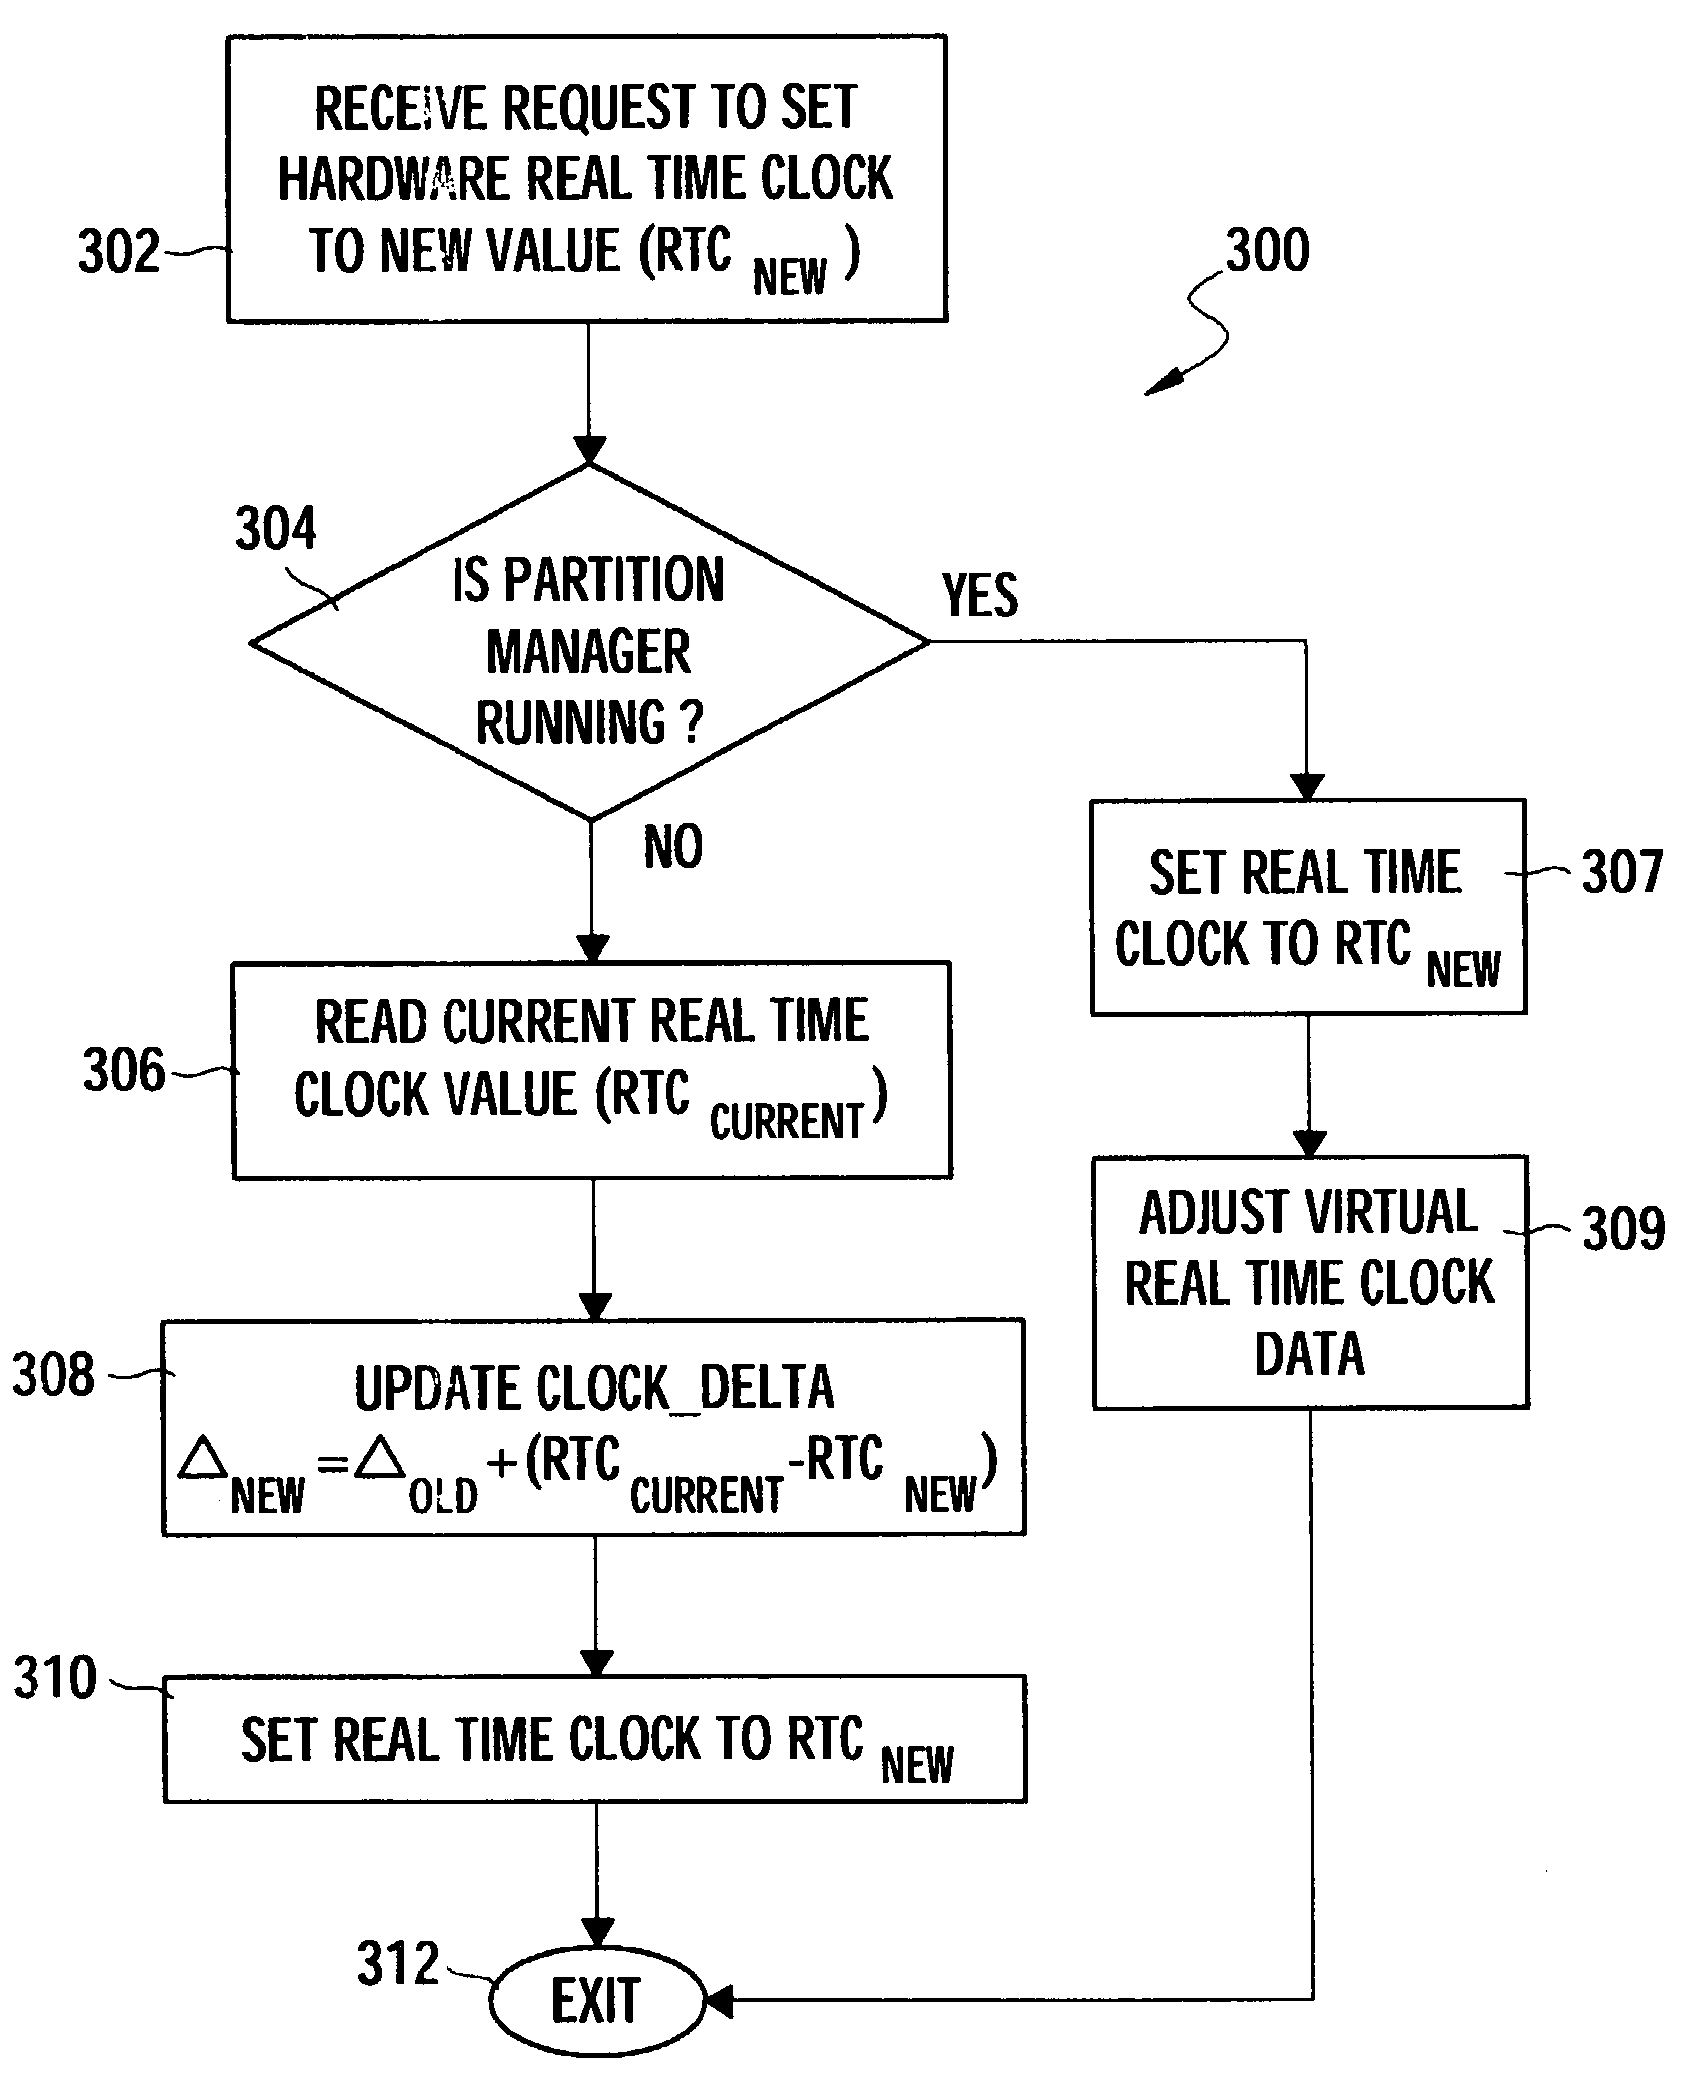 Virtual real time clock maintenance in a logically partitioned computer system